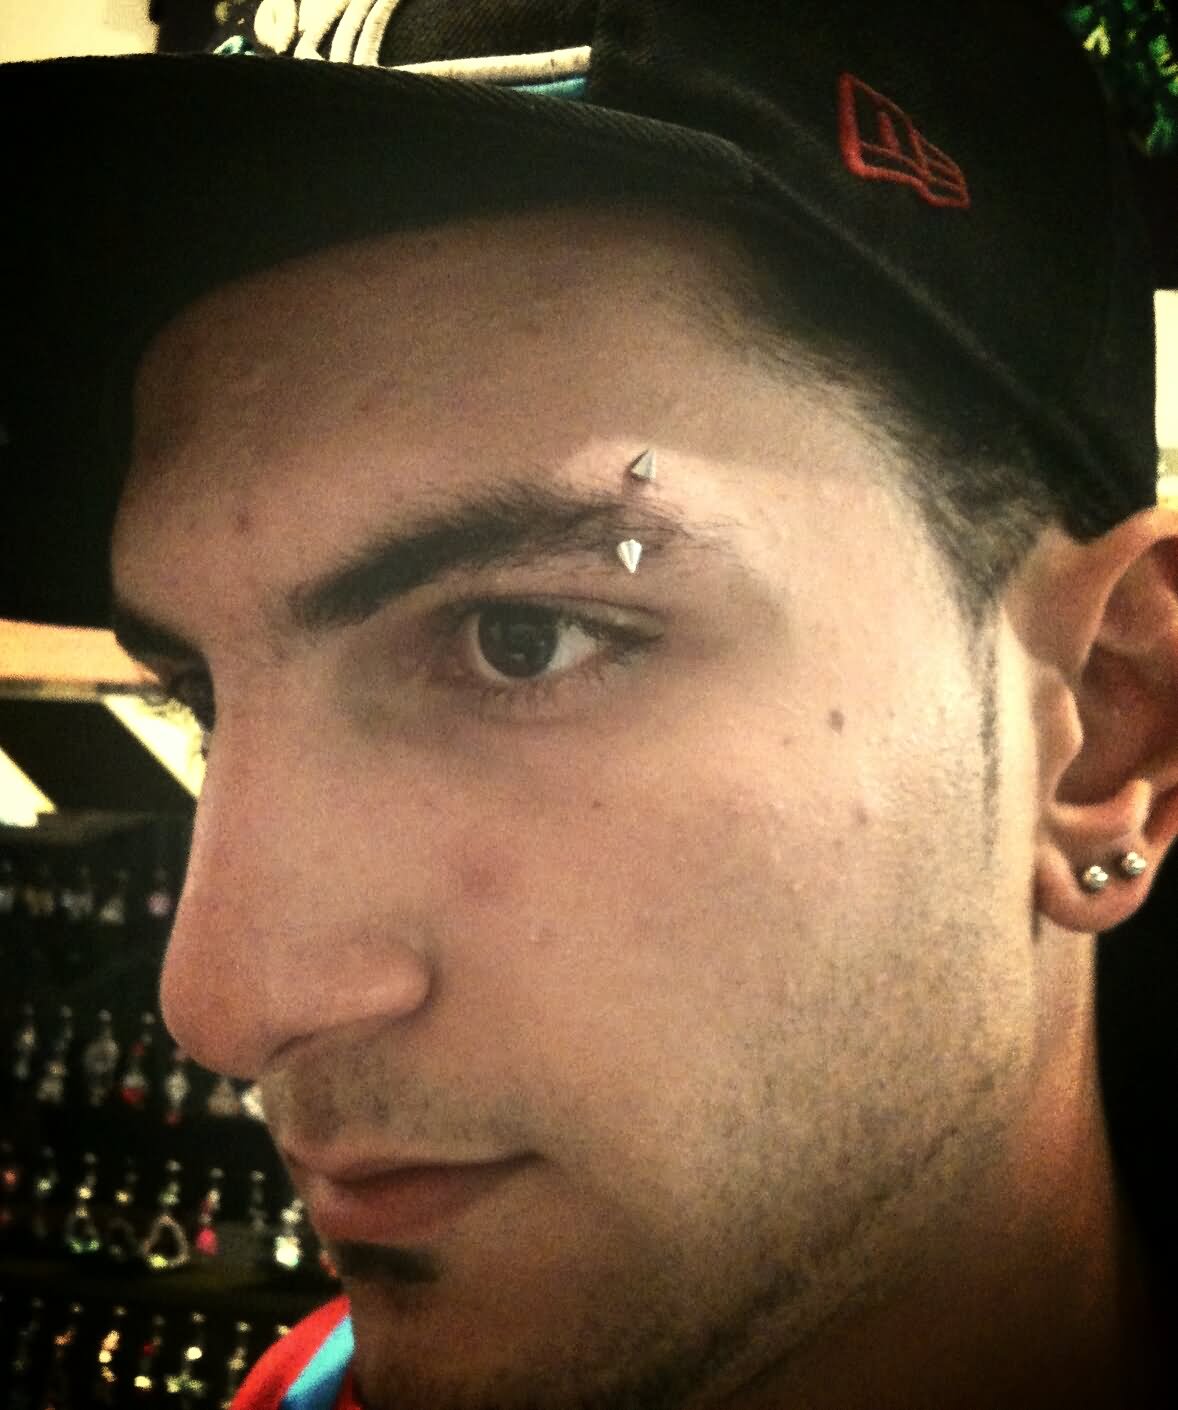 Eyebrow Piercing With Spike Barbell